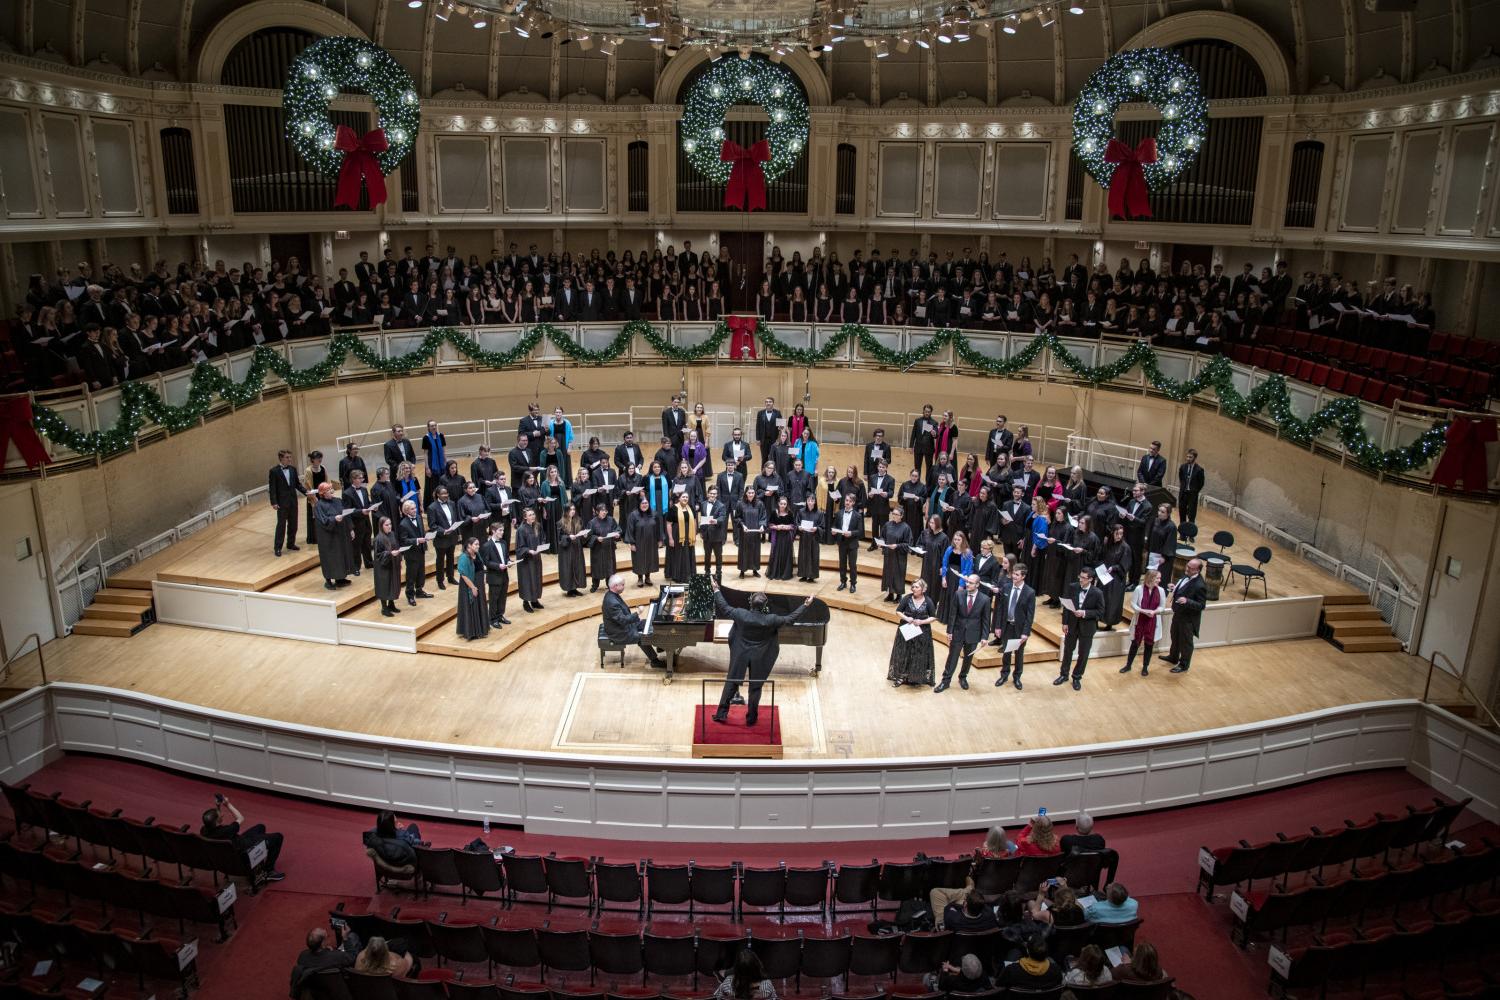 The <a href='http://sx2.4dian8.com'>bv伟德ios下载</a> Choir performs in the Chicago Symphony Hall.